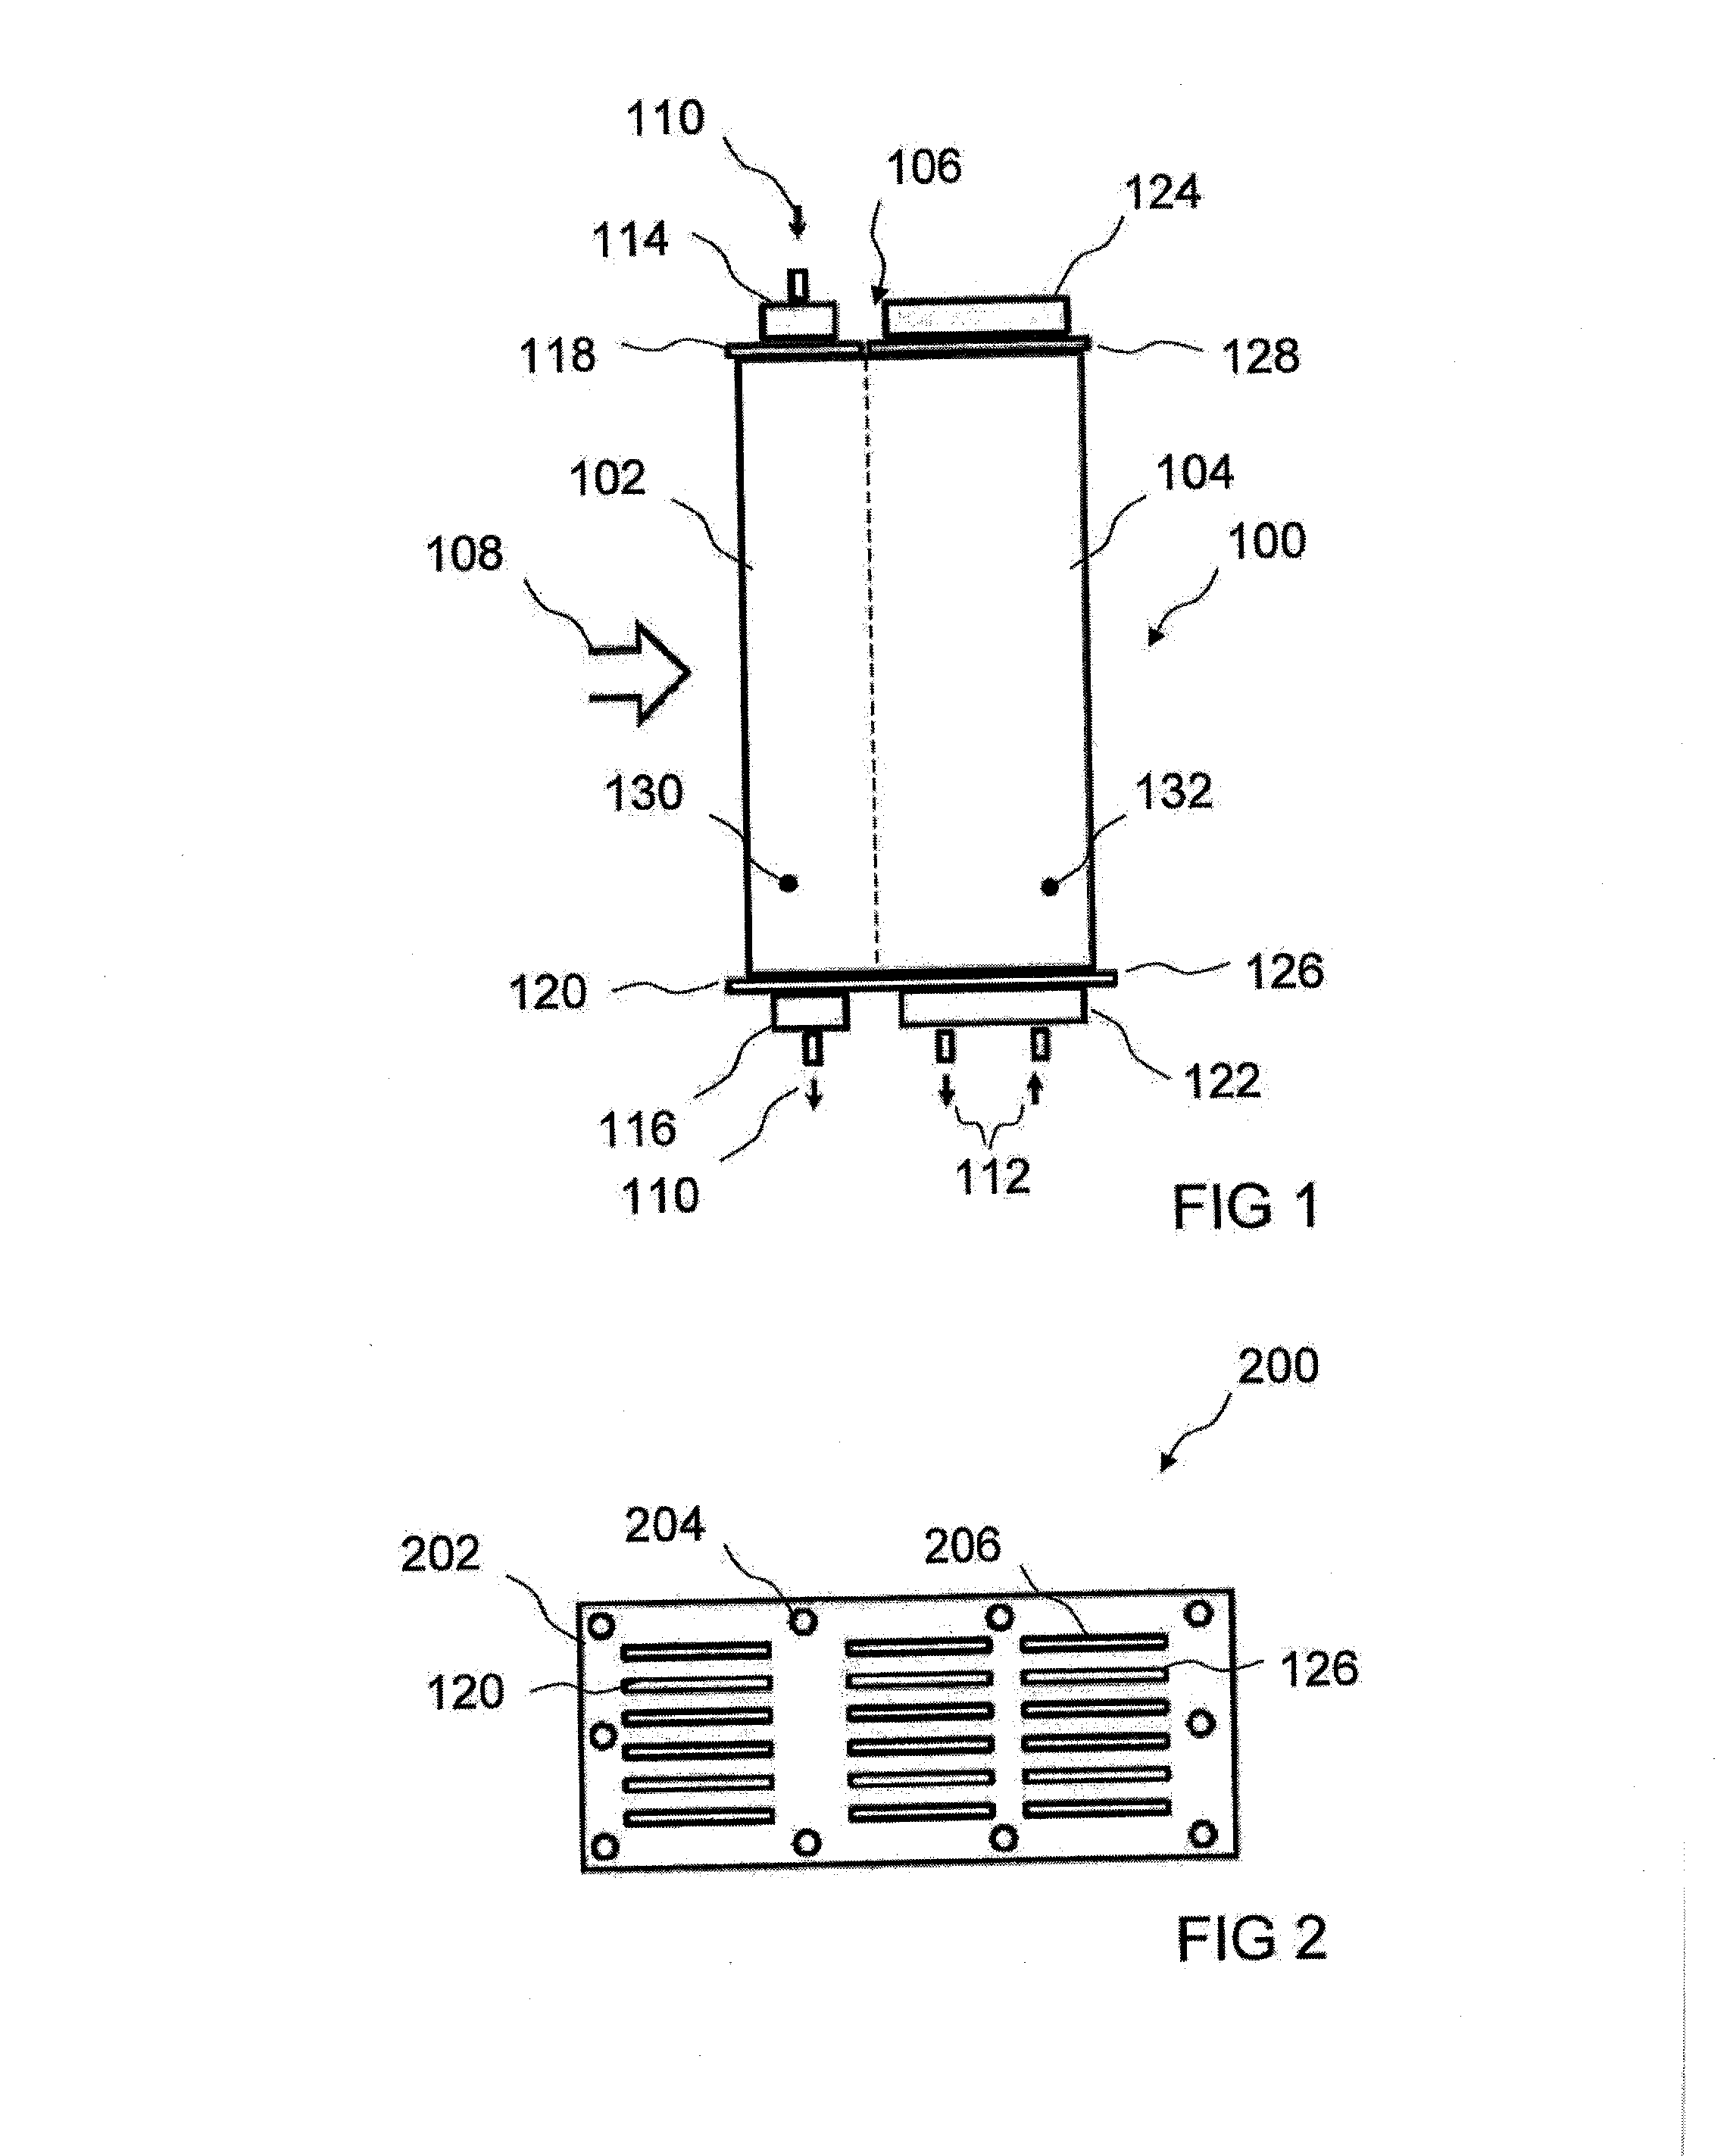 Heat exchanger for cooling charge air